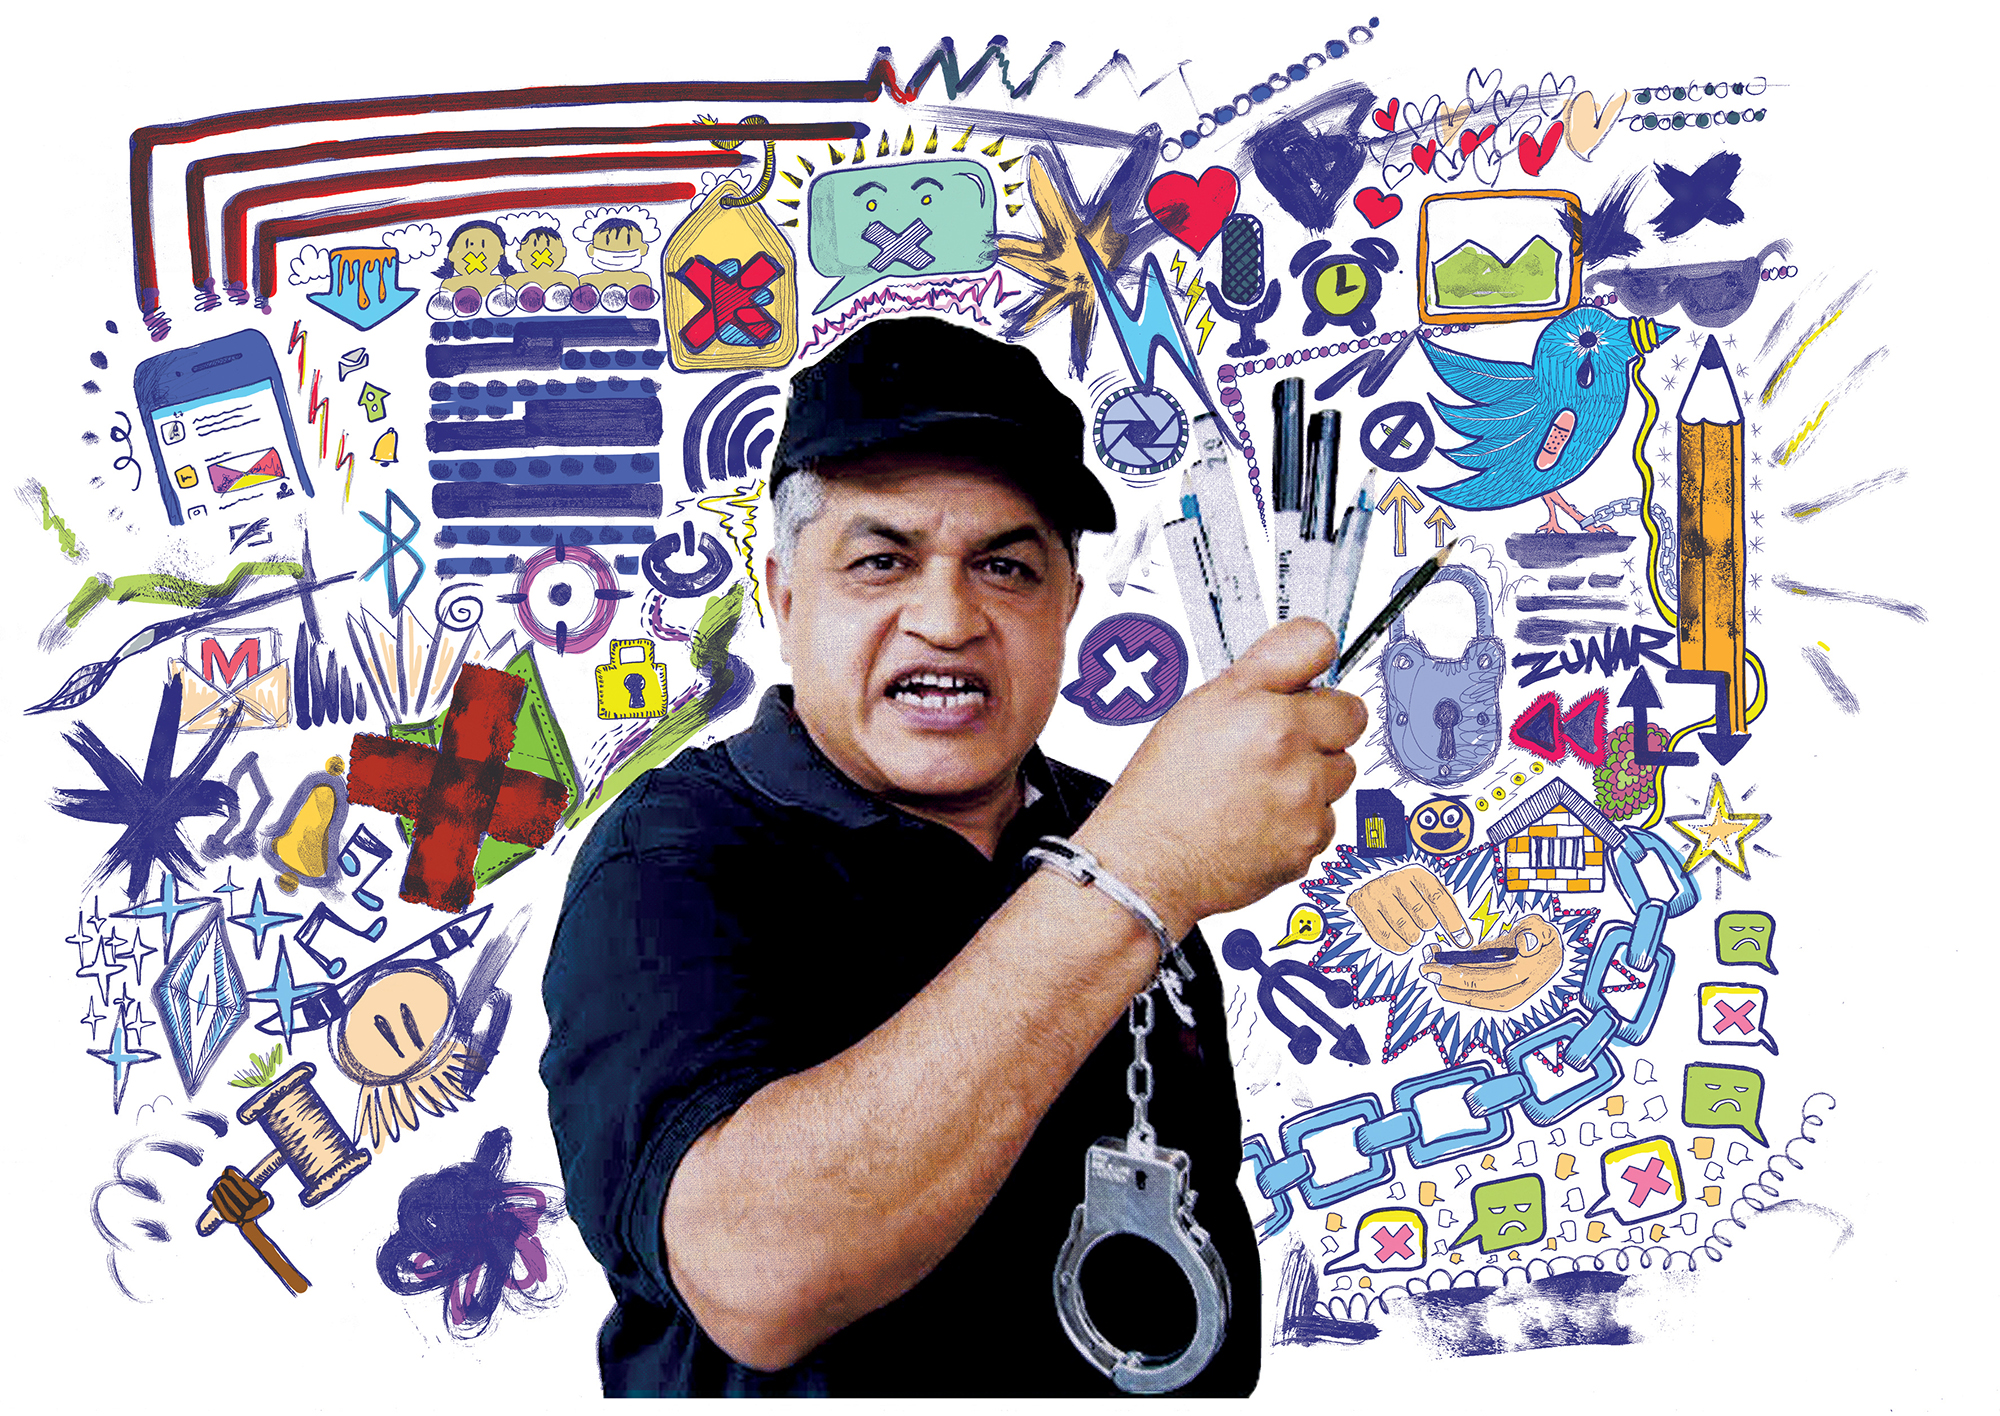 Drawing with embedded photograph showing one of this years cases for Write for Rights. All design assets associated with this campaign available here: https://amnesty.app.box.com/s/9w3s2c96tz7kl0i26gb914bj0ua1qvlb Zulkiflee Anwar “Zunar” Ulhaque faces a lengthy jail sentence after taking to Twitter to condemn the jailing of Malaysian opposition leader Anwar Ibrahim. Zunar is a political cartoonist well known for his satirical attacks on government corruption and electoral fraud. He now faces nine charges under the Sedition Act, a draconian, outdated law from 1948 dredged up to grant the government sweeping powers to arrest and lock up its critics. In the first six months of 2015, more than 40 journalists, academics, political activists and lawyers were interrogated, arrested or charged under the Sedition Act. The space for dissent and debate in Malaysia is disappearing fast.